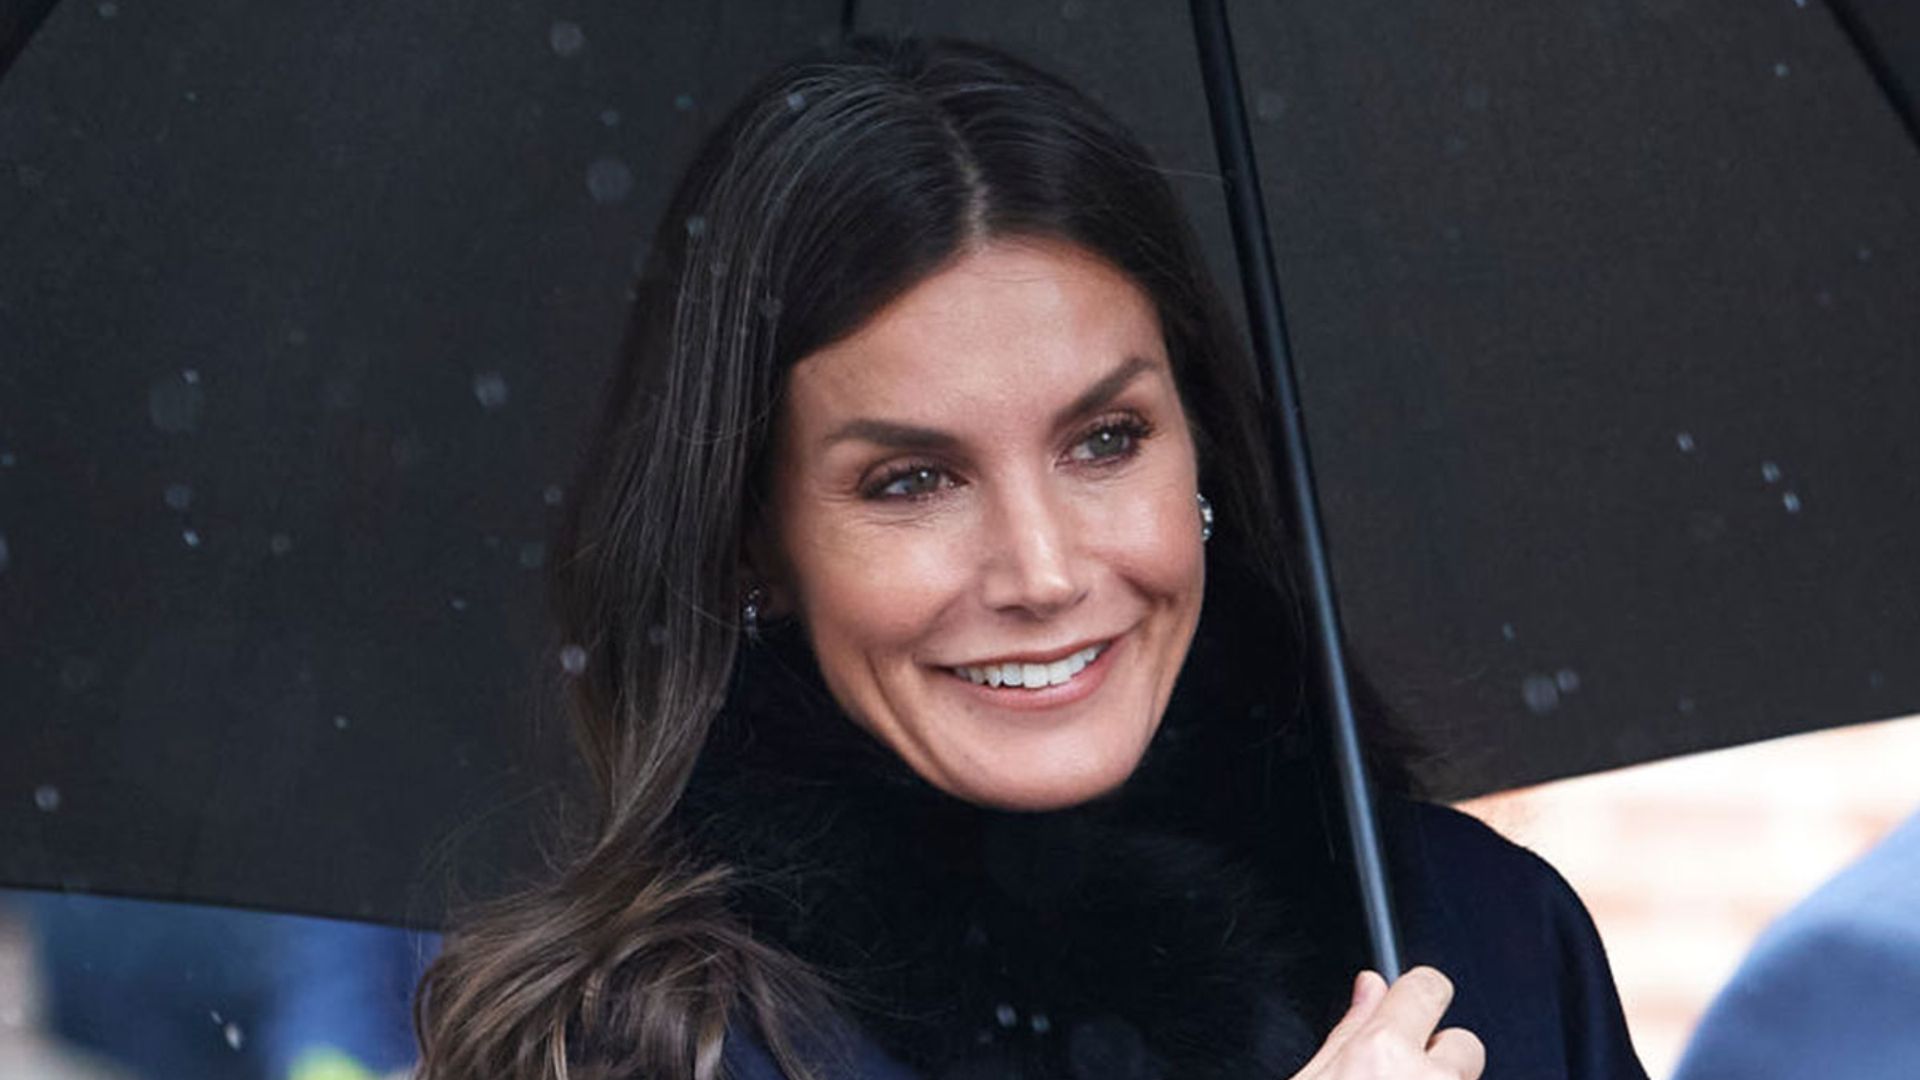 Queen Letizia looks sensational in navy pencil dress for special occasion